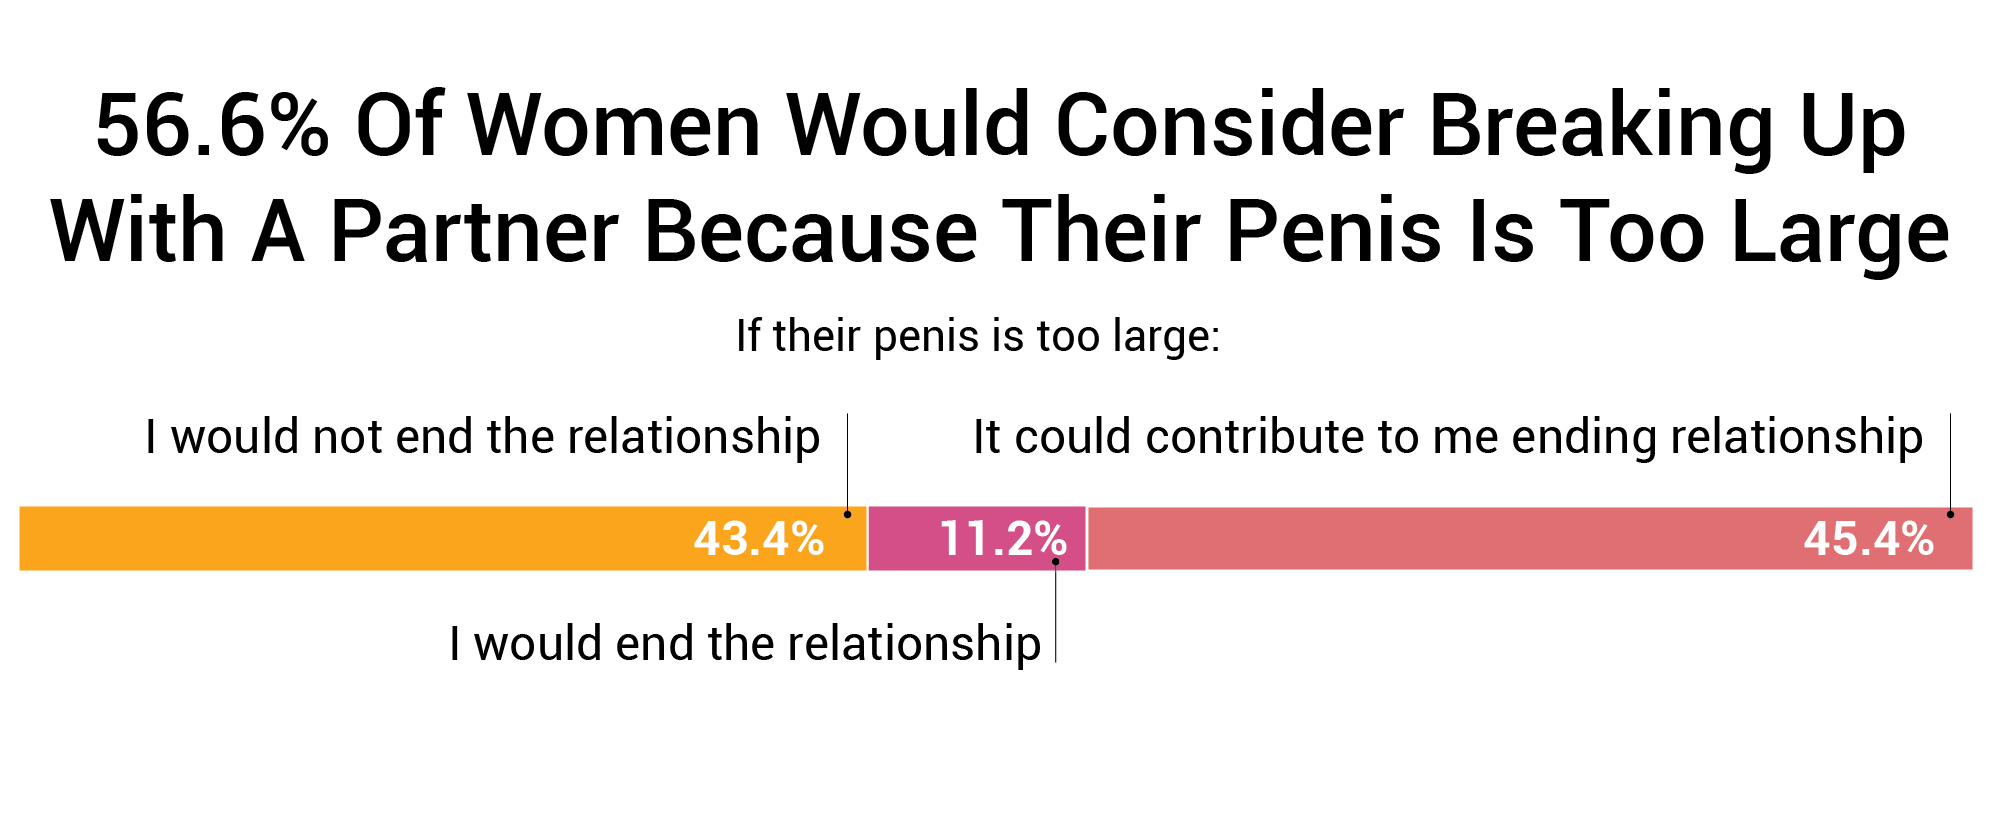 56.6-Of-Women-Would-Consider-Breaking-Up-With-A-Partner-Because-Their-Penis-Is-Too-Large.png